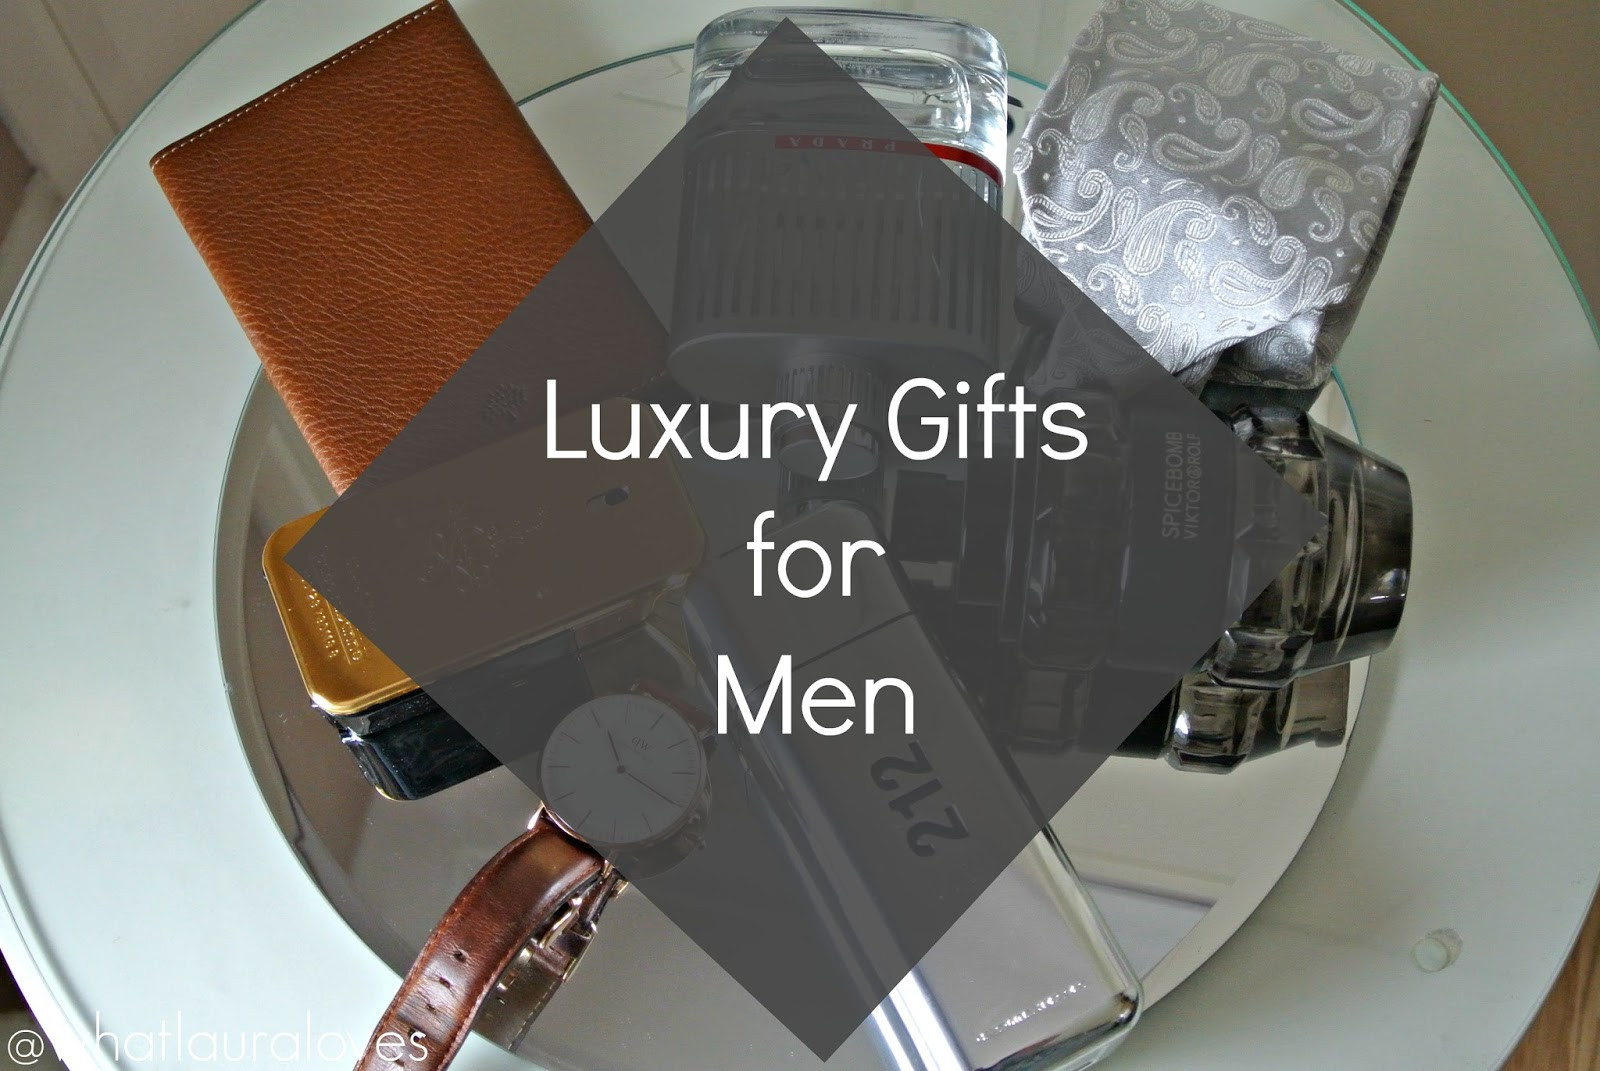 Birthday Gifts For Men
 Top 5 Luxury Gift Ideas for Men